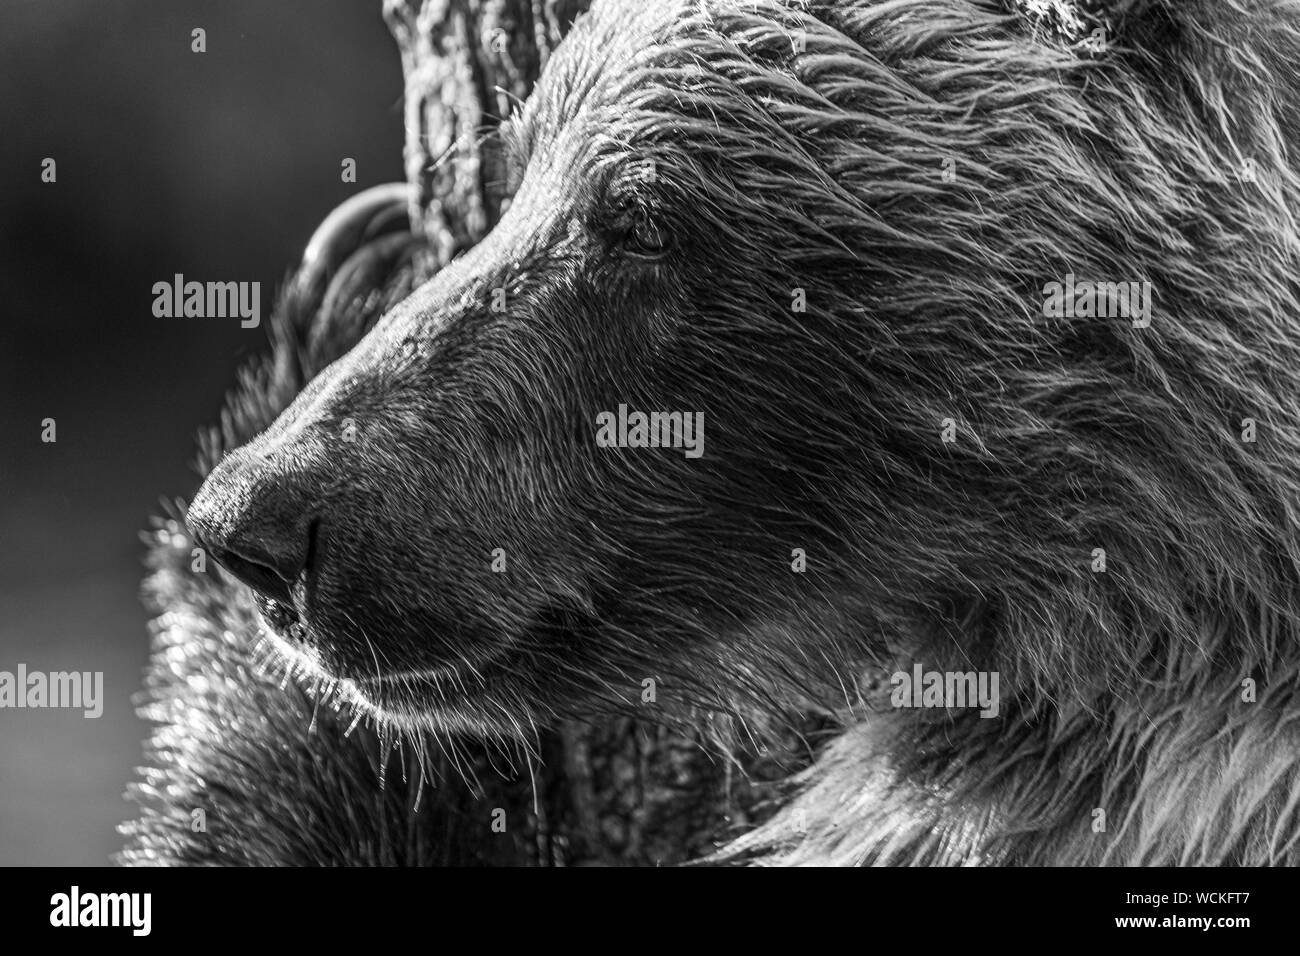 Detail of the face of a Grizzly Bear rubbing up against a tree, Ursus arctos horribilis, Brown Bear, North American, Canada, Stock Photo